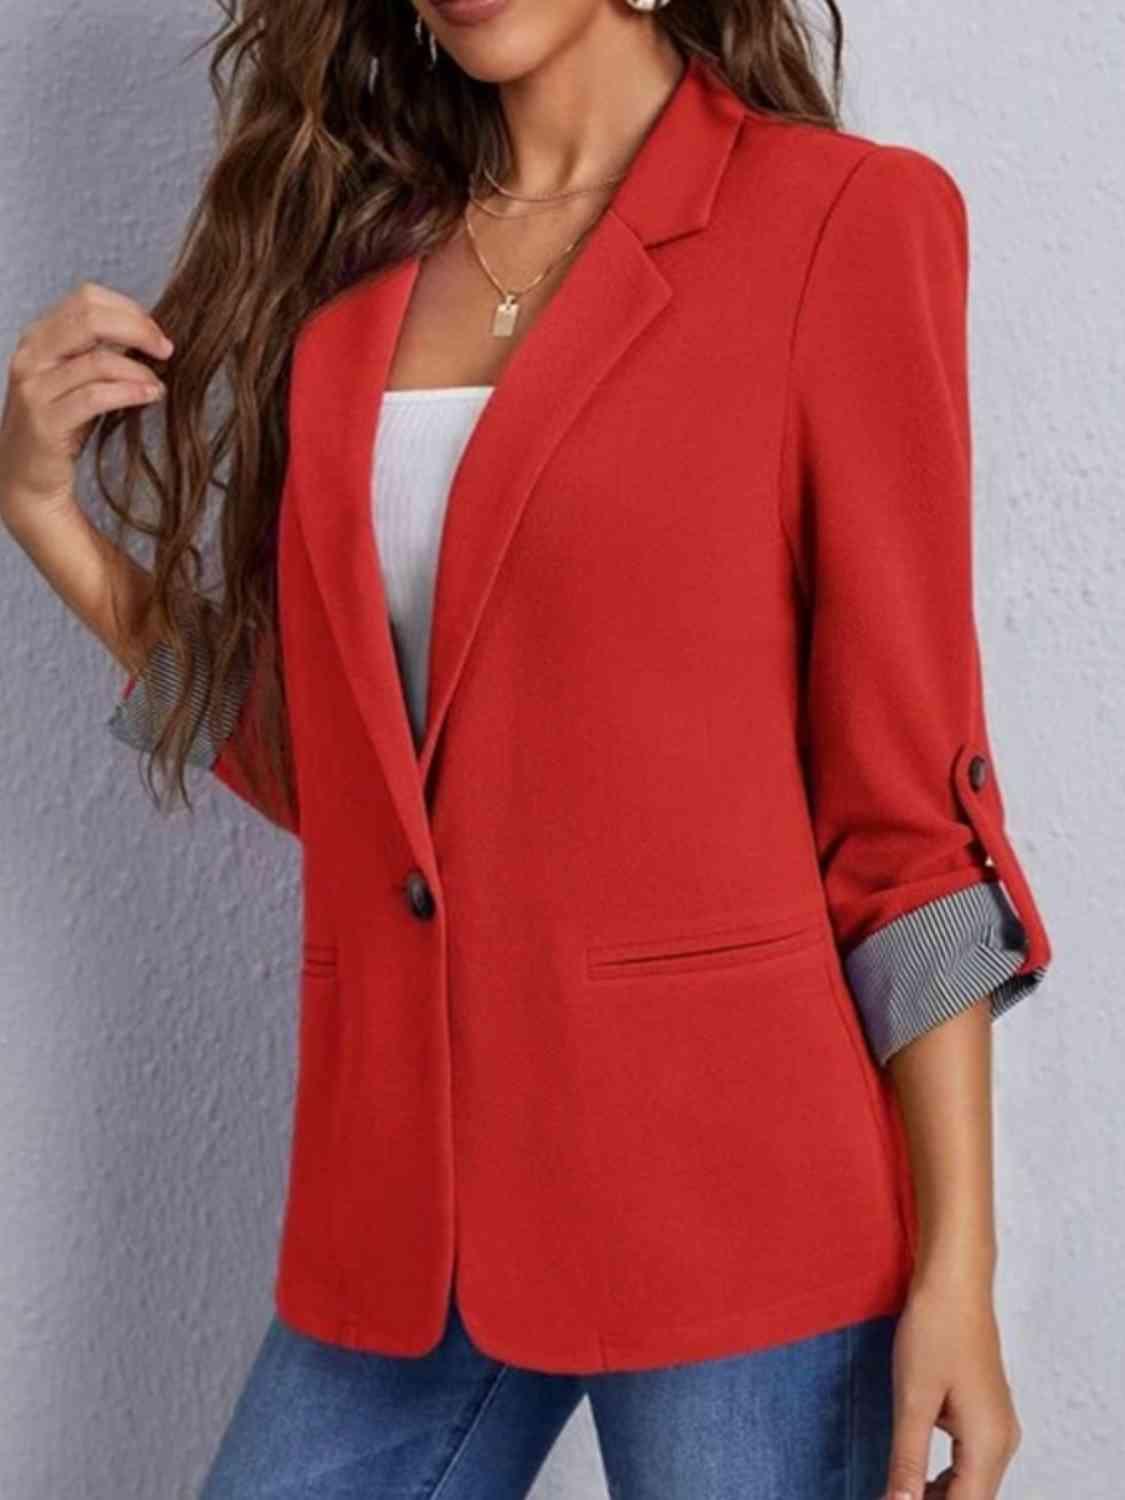 a woman wearing a red blazer and jeans